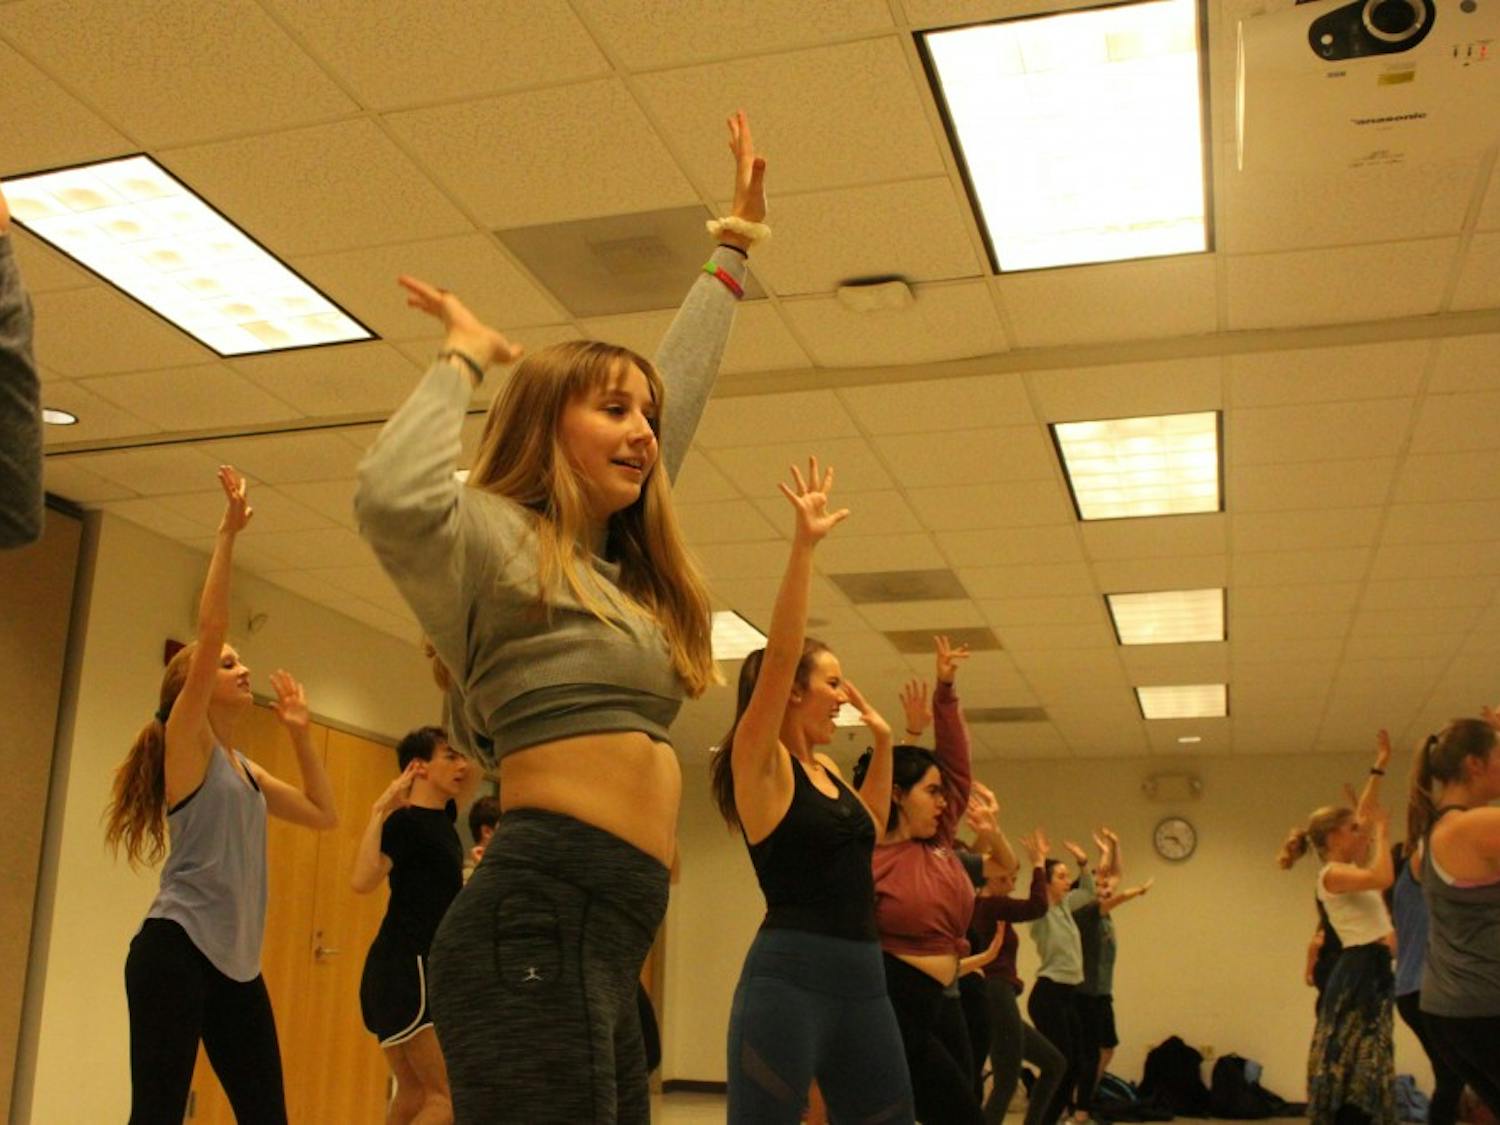 Students rehearse choreography to Voulez-Vous by Abba at the Mamma Mia auditions in the Student Union on Thursday, Jan. 10, 2019.